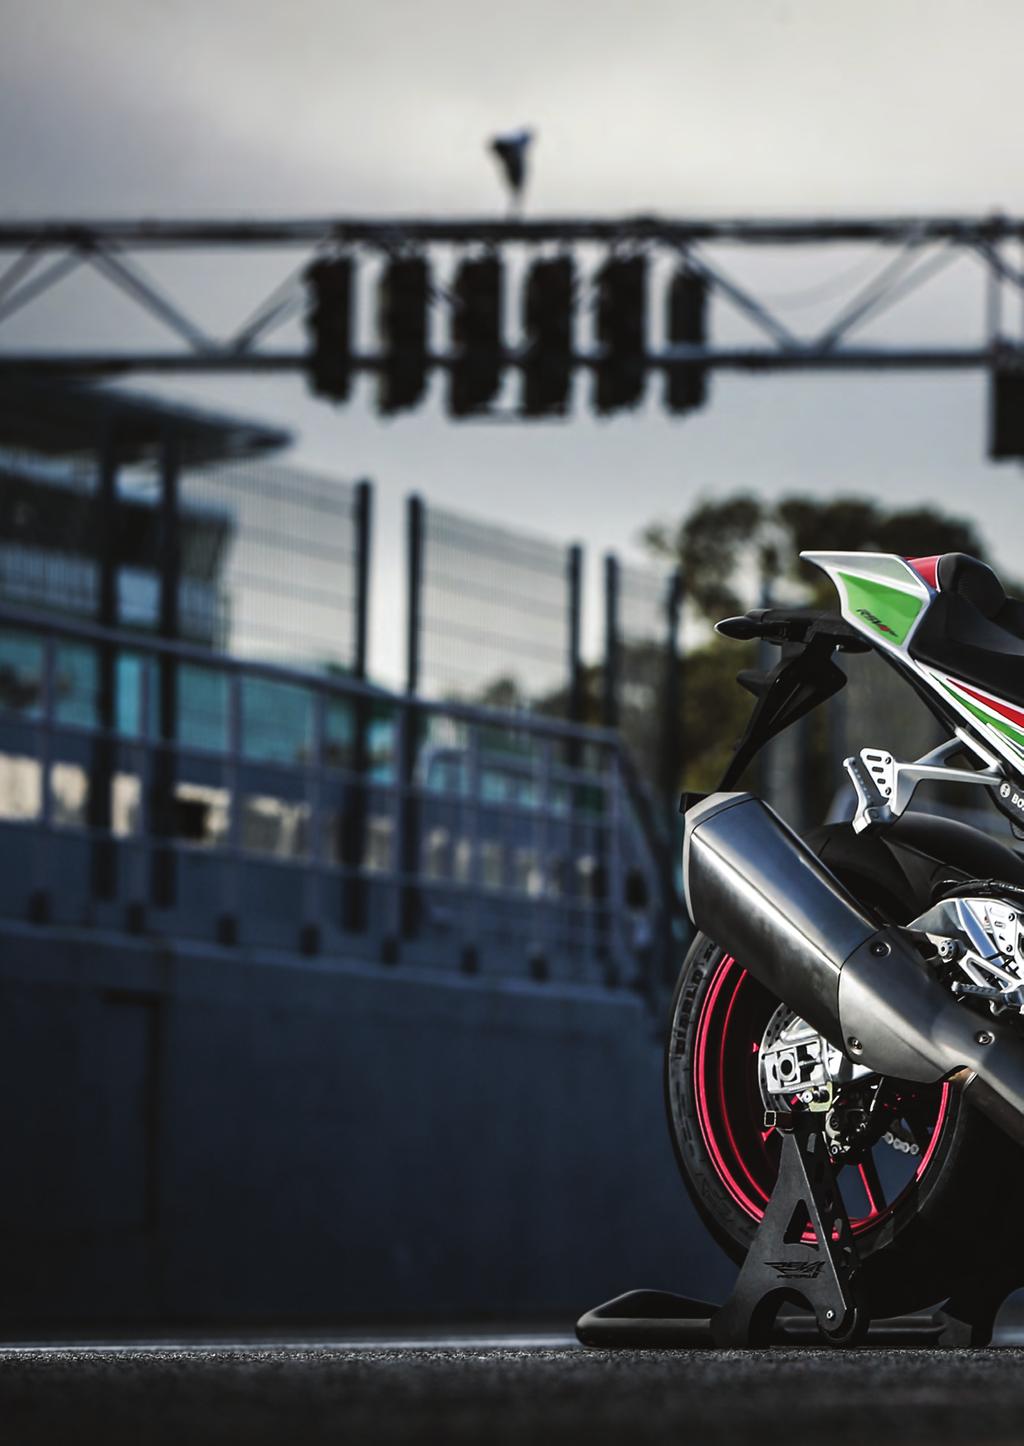 #BEARACER CLUB IS IDENTITY. IT S THE PRIDE OF OWNING AN APRILIA. IT S LOOKING INTO ANOTHER PERSON S EYES AND DISCOVERING SOMEONE OF YOUR OWN KIND. IT S WHAT MAKES A MOTORCYCLIST A TRUE RACER.